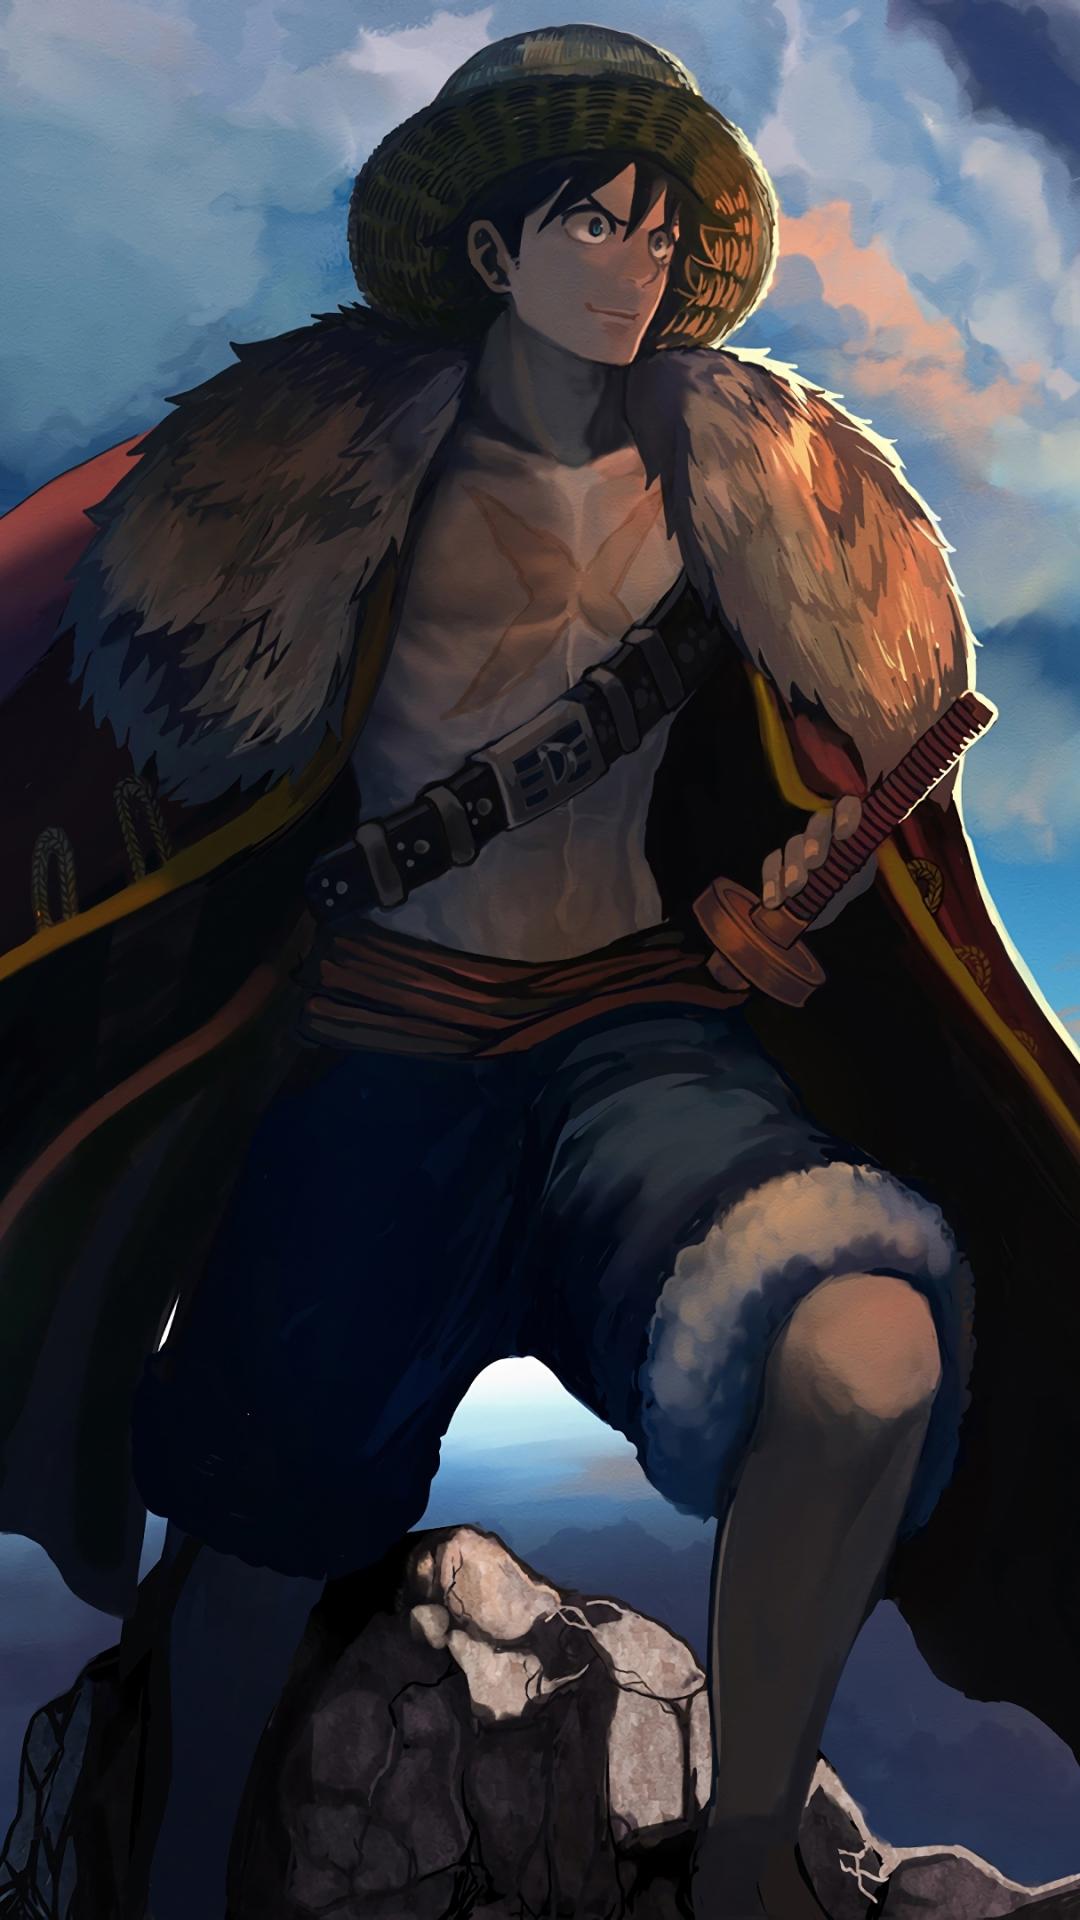 1080 x 1920 · jpeg - Anime/One Piece (1080x1920) Wallpaper ID: 776065 - Mobile Abyss